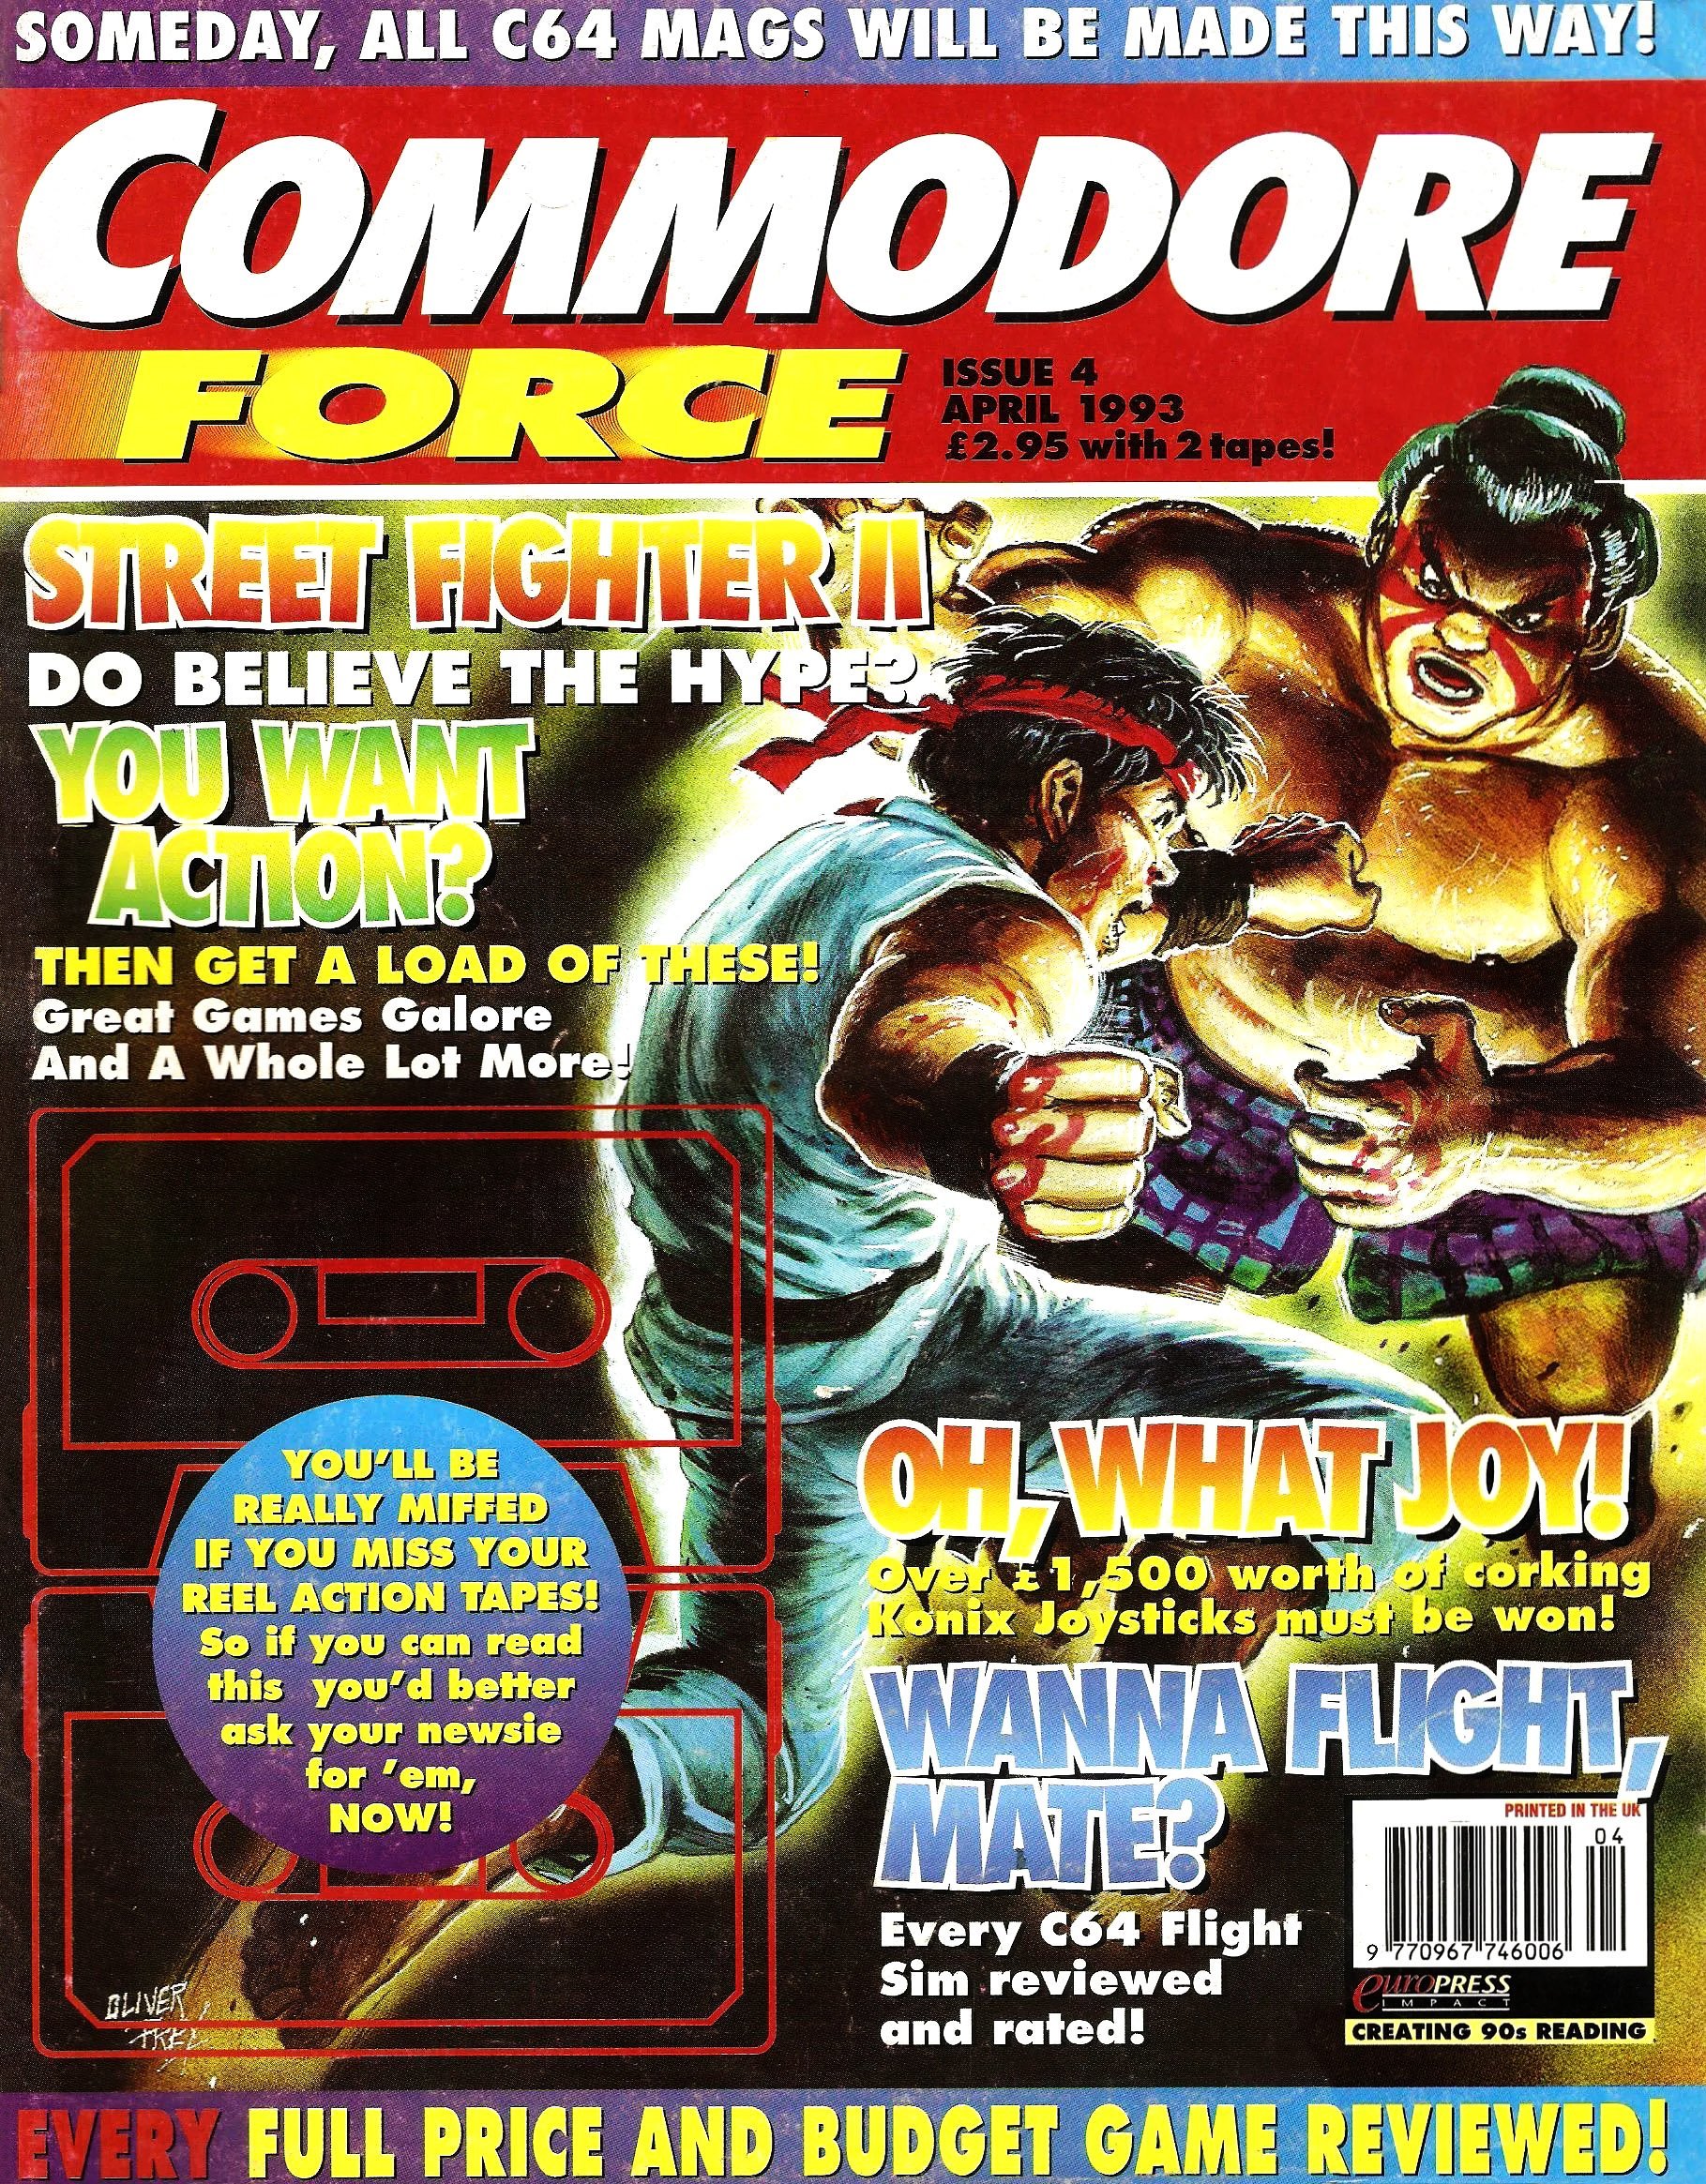 Commodore Force 04 (April 1993)